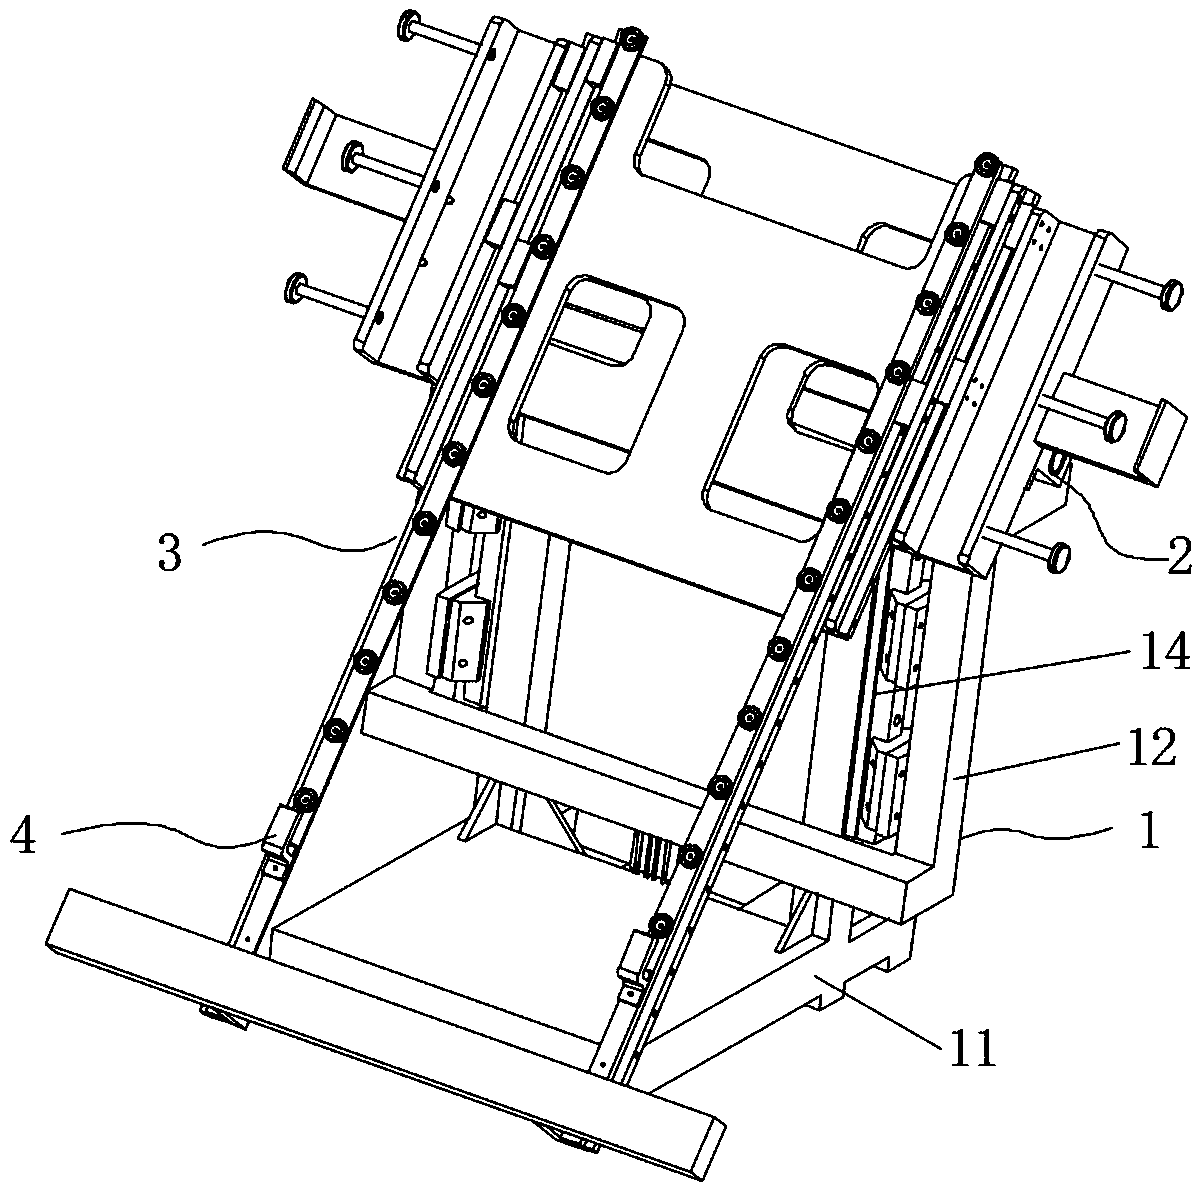 A method for loading and unloading a large liquid crystal panel